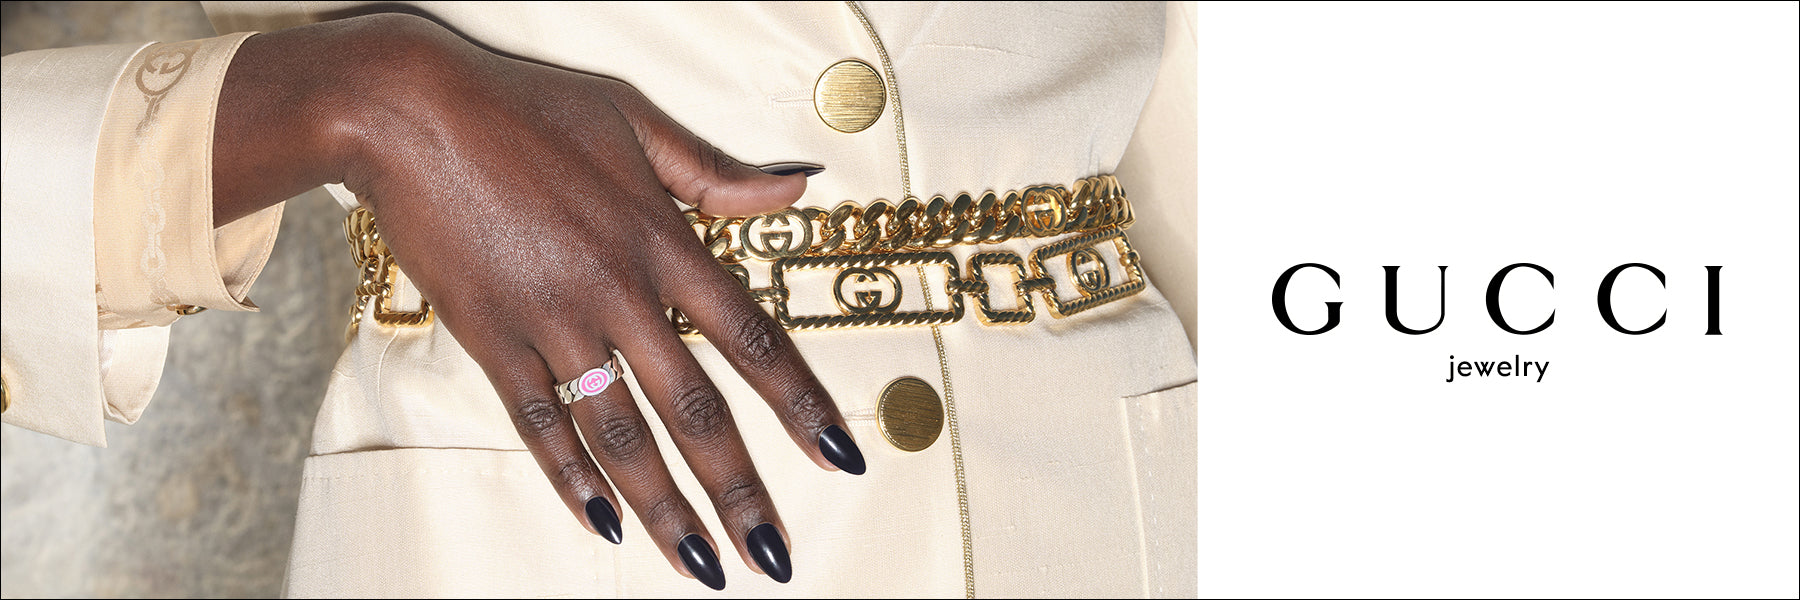 Model wearing Gucci Silver Jewellery Banner Image